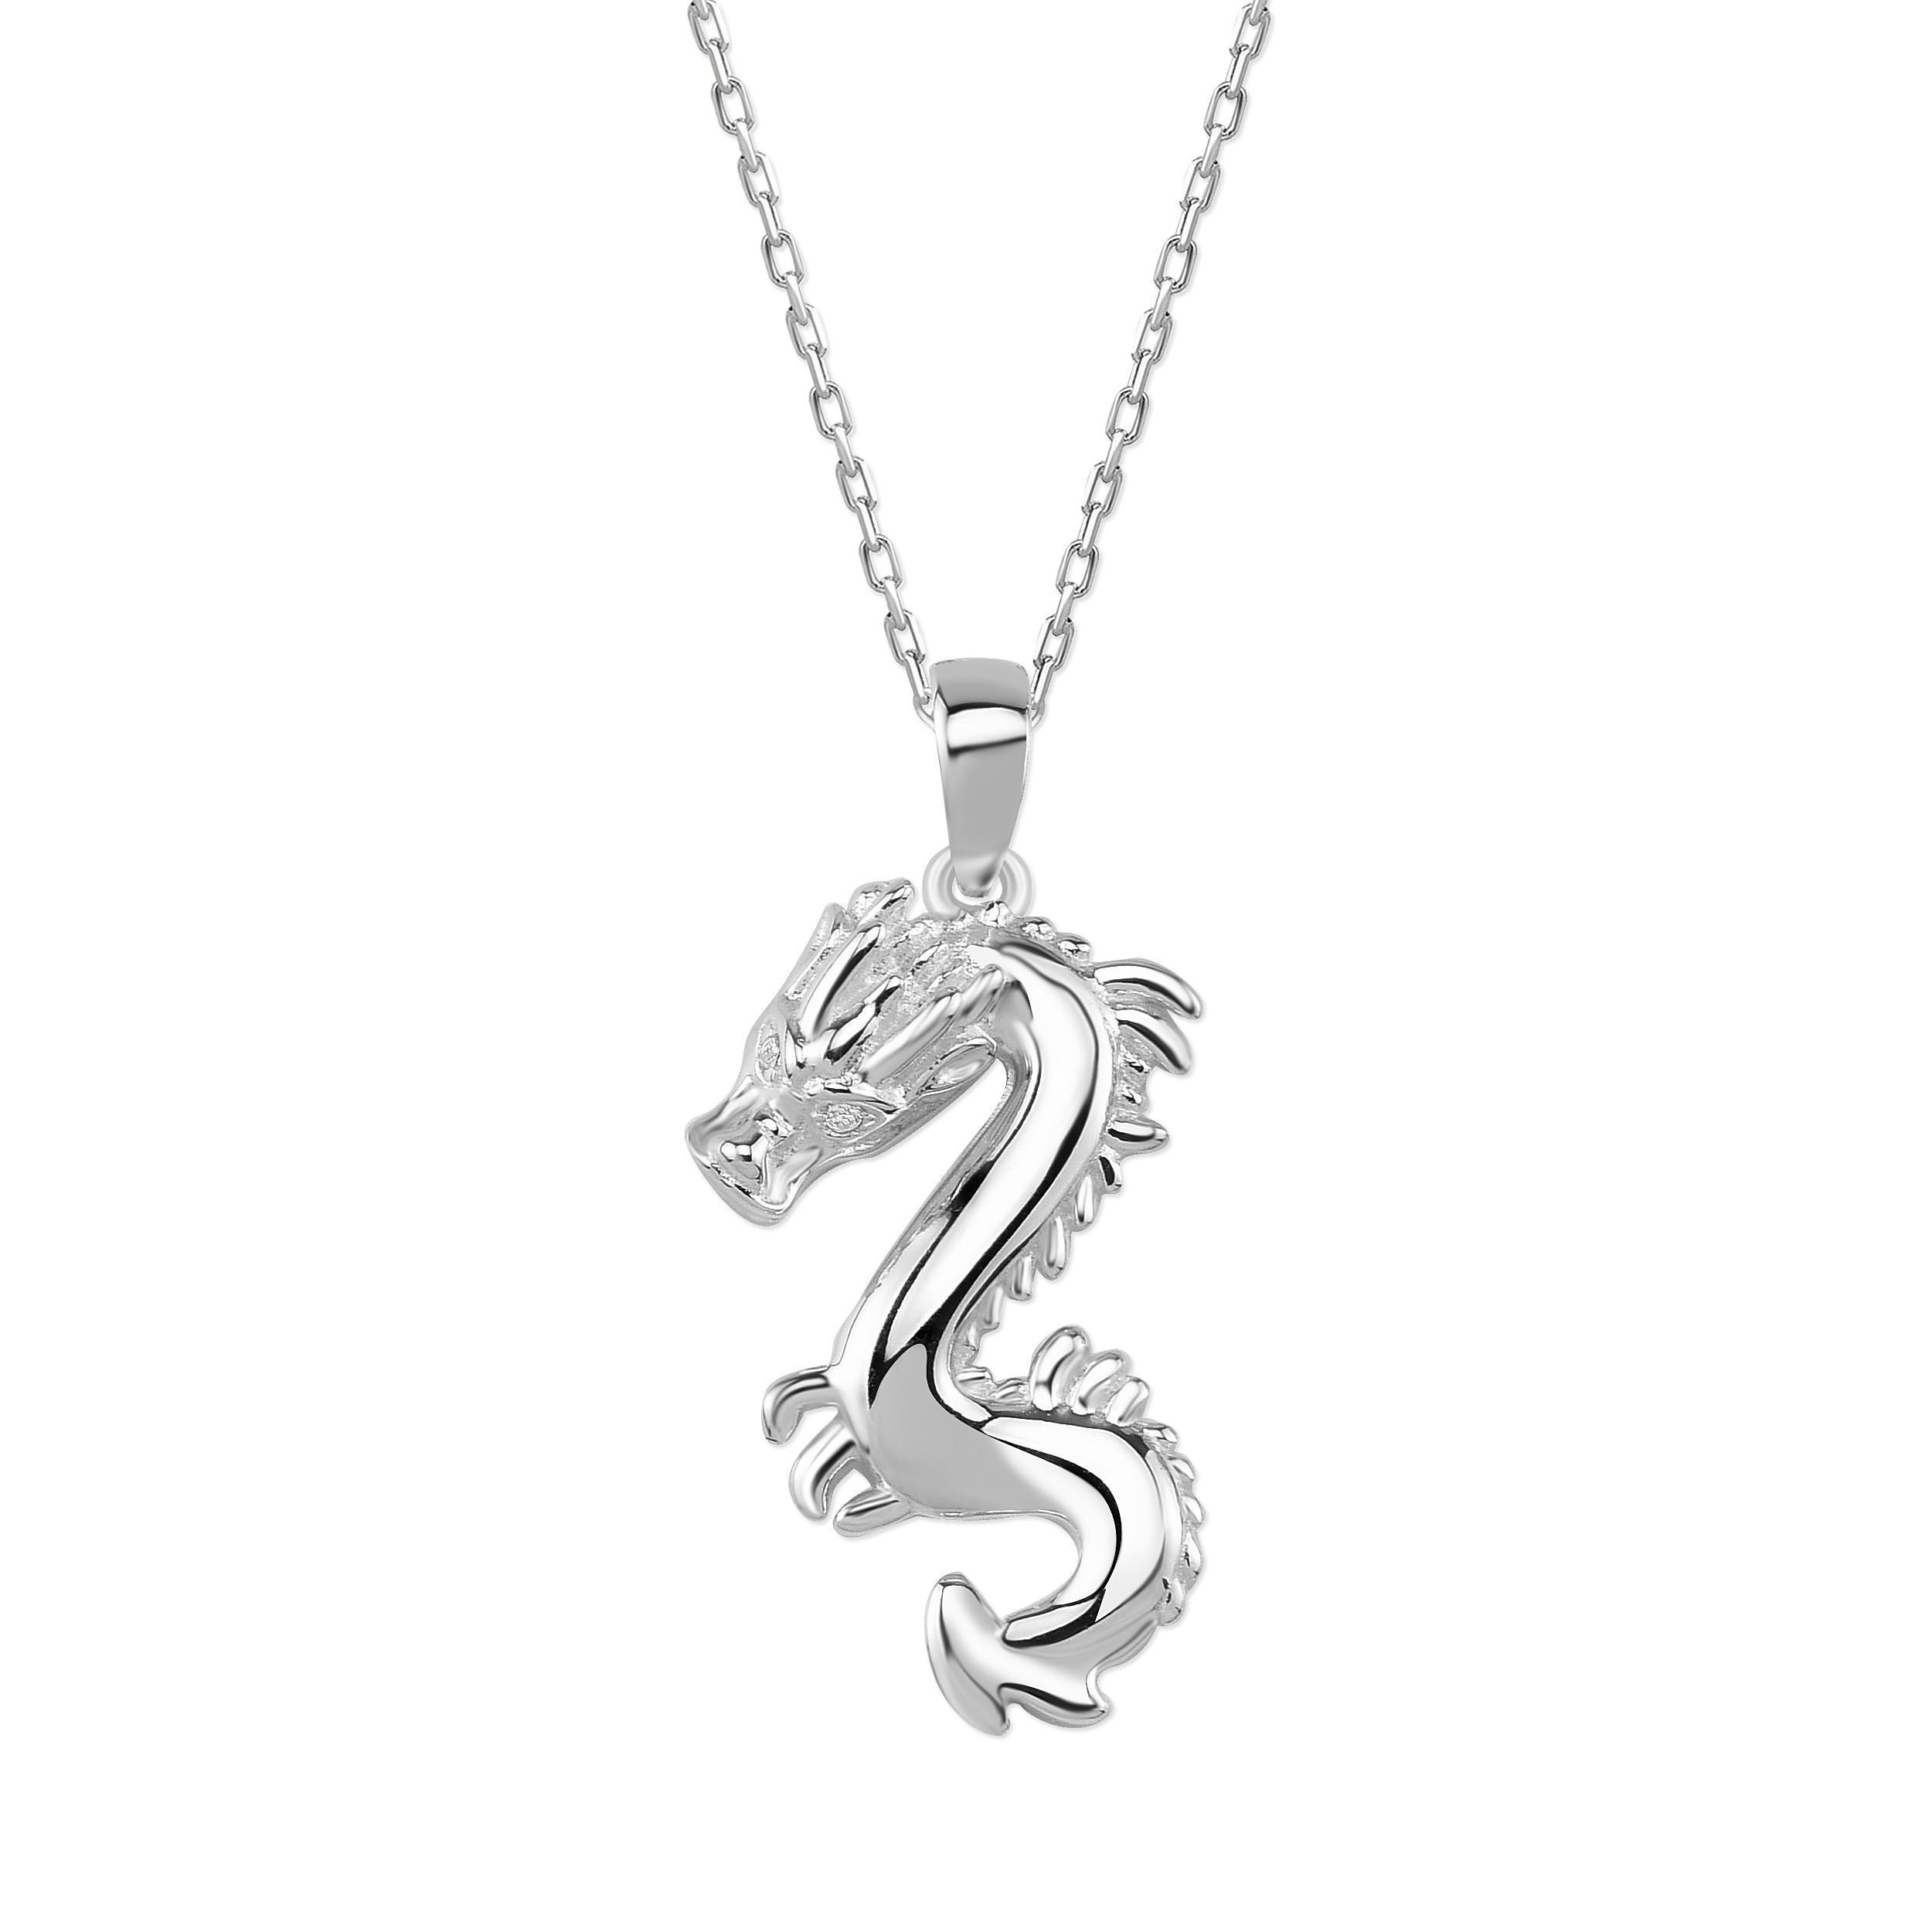 THE DRAGON NECKLACE